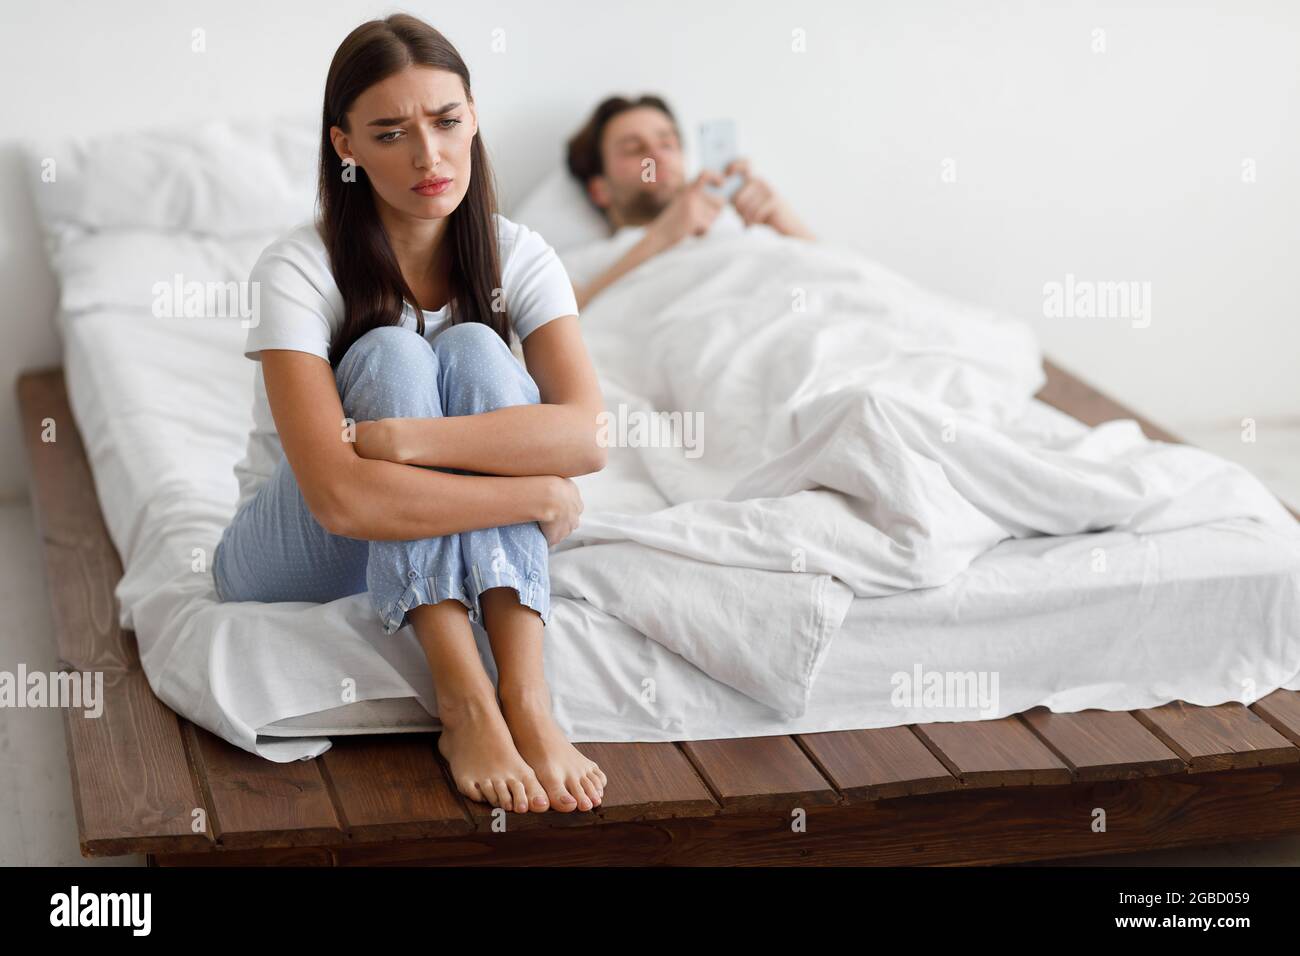 Unhappy Wife Suspecting Infidelity While Cheating Husband Texting In Bedroom Stock Photo